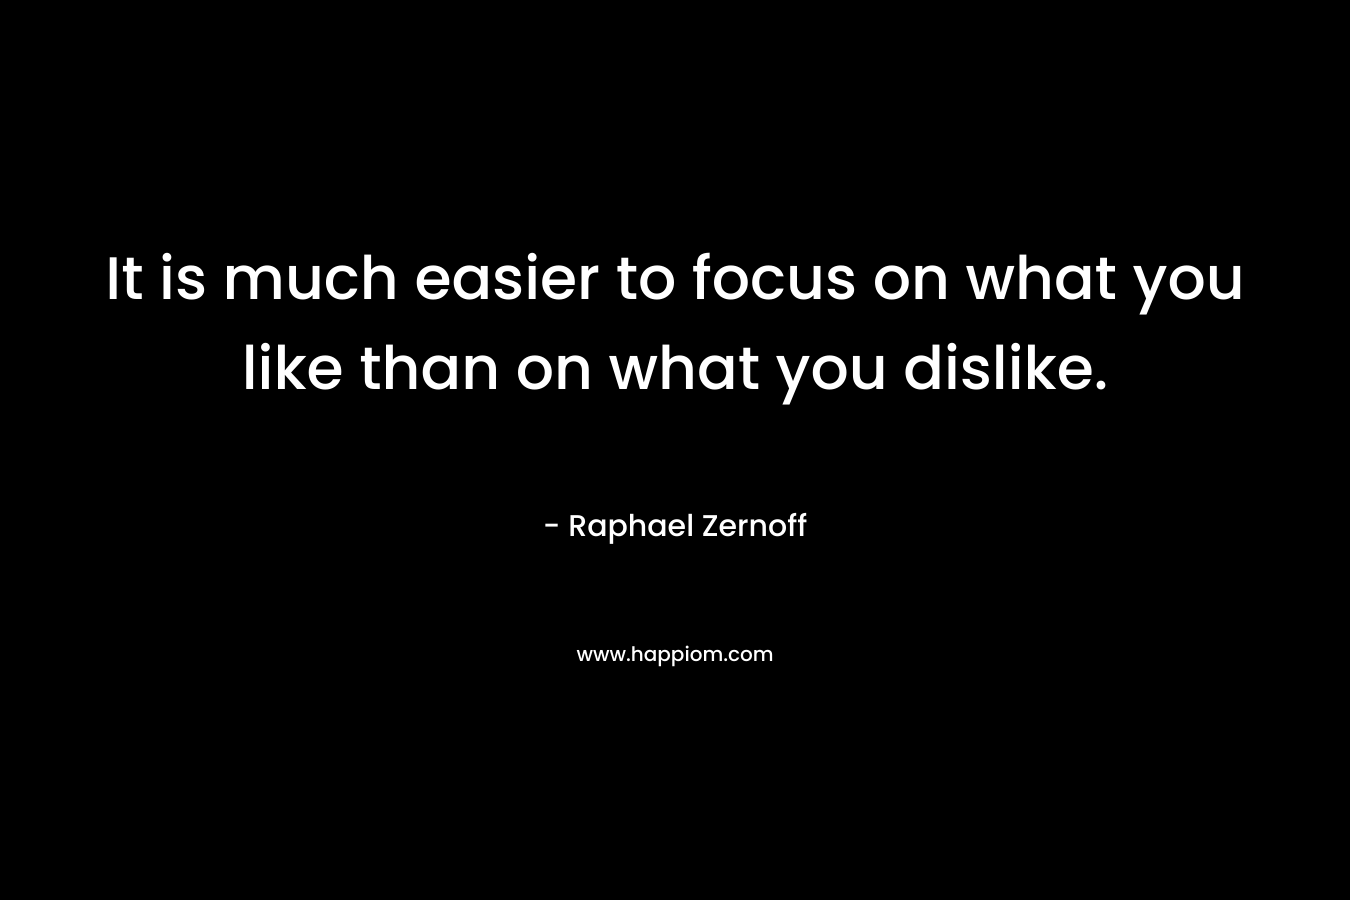 It is much easier to focus on what you like than on what you dislike.